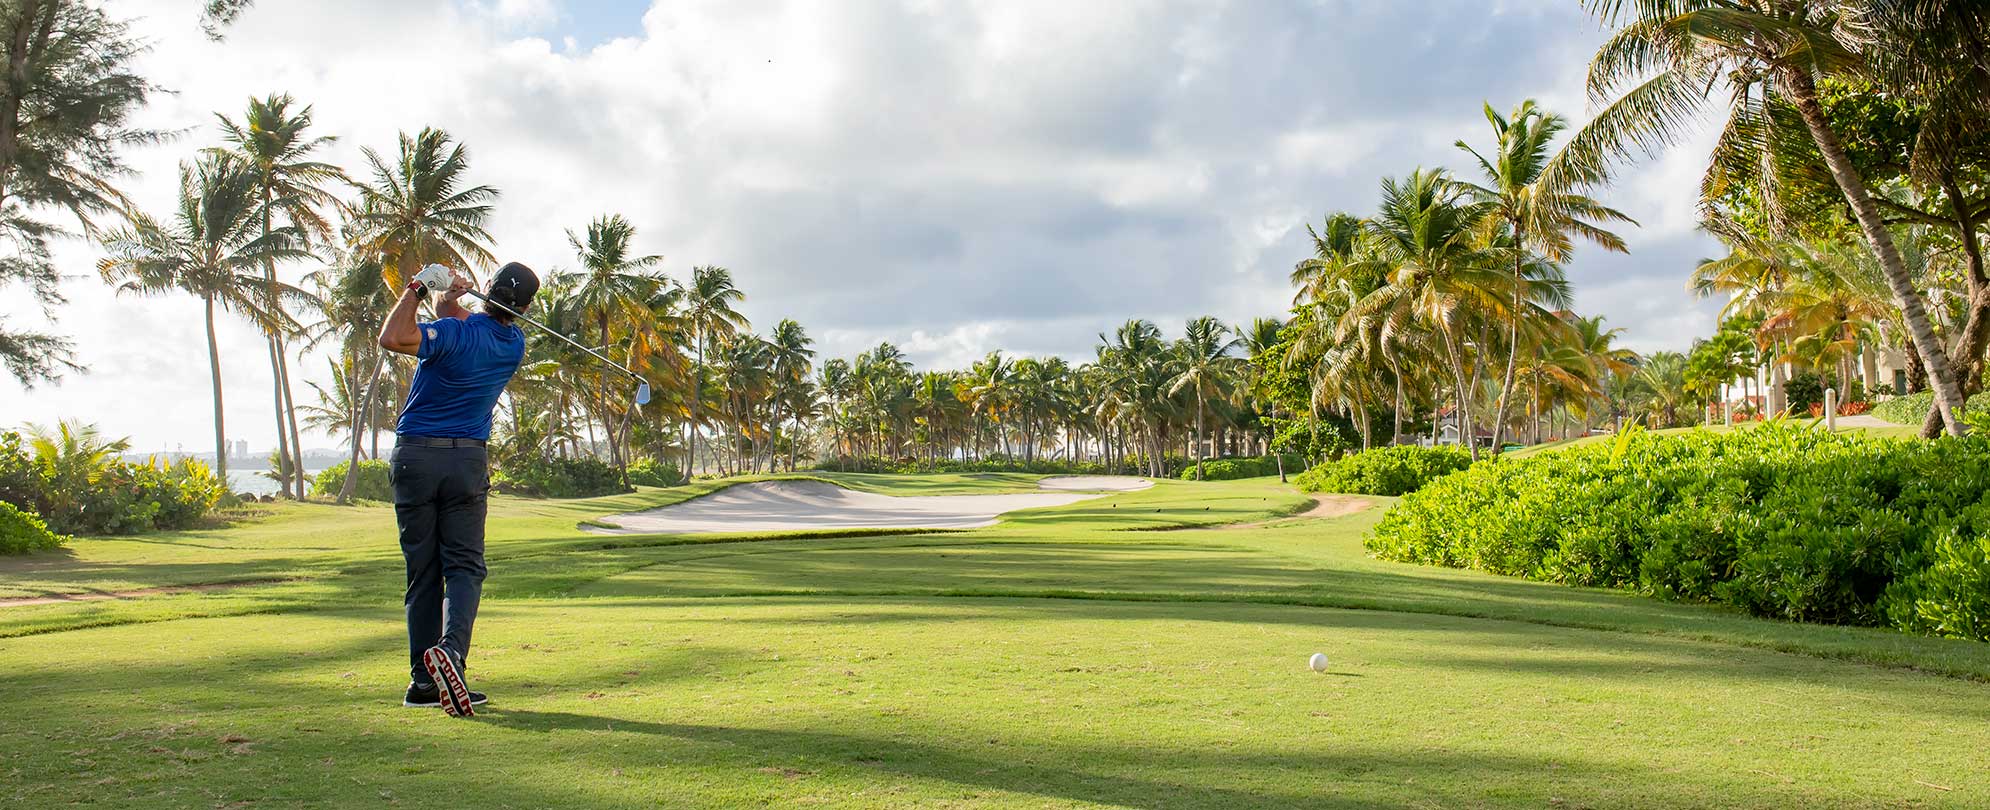 A man golfing at one of the popular Puerto Rico golf courses near Margaritaville Vacation Club by Wyndham - Rio Mar.